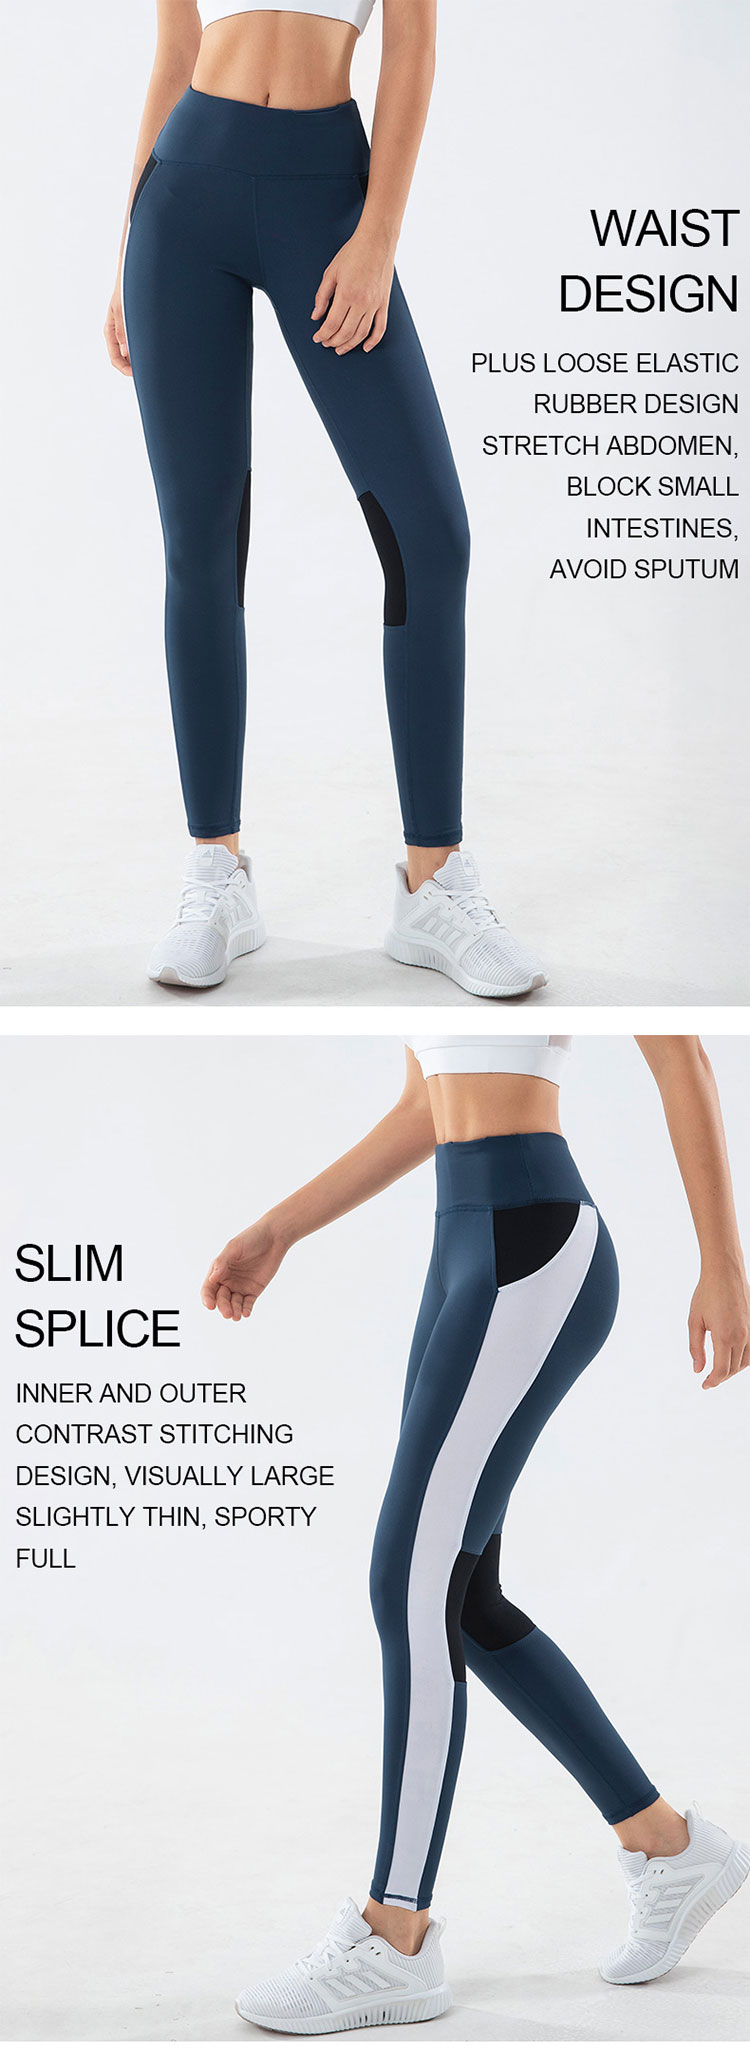 Slim-spliceslim-splice-inner-and-outer-contrast-stitching-design-visually-large-slightly-thin-sporty-full.